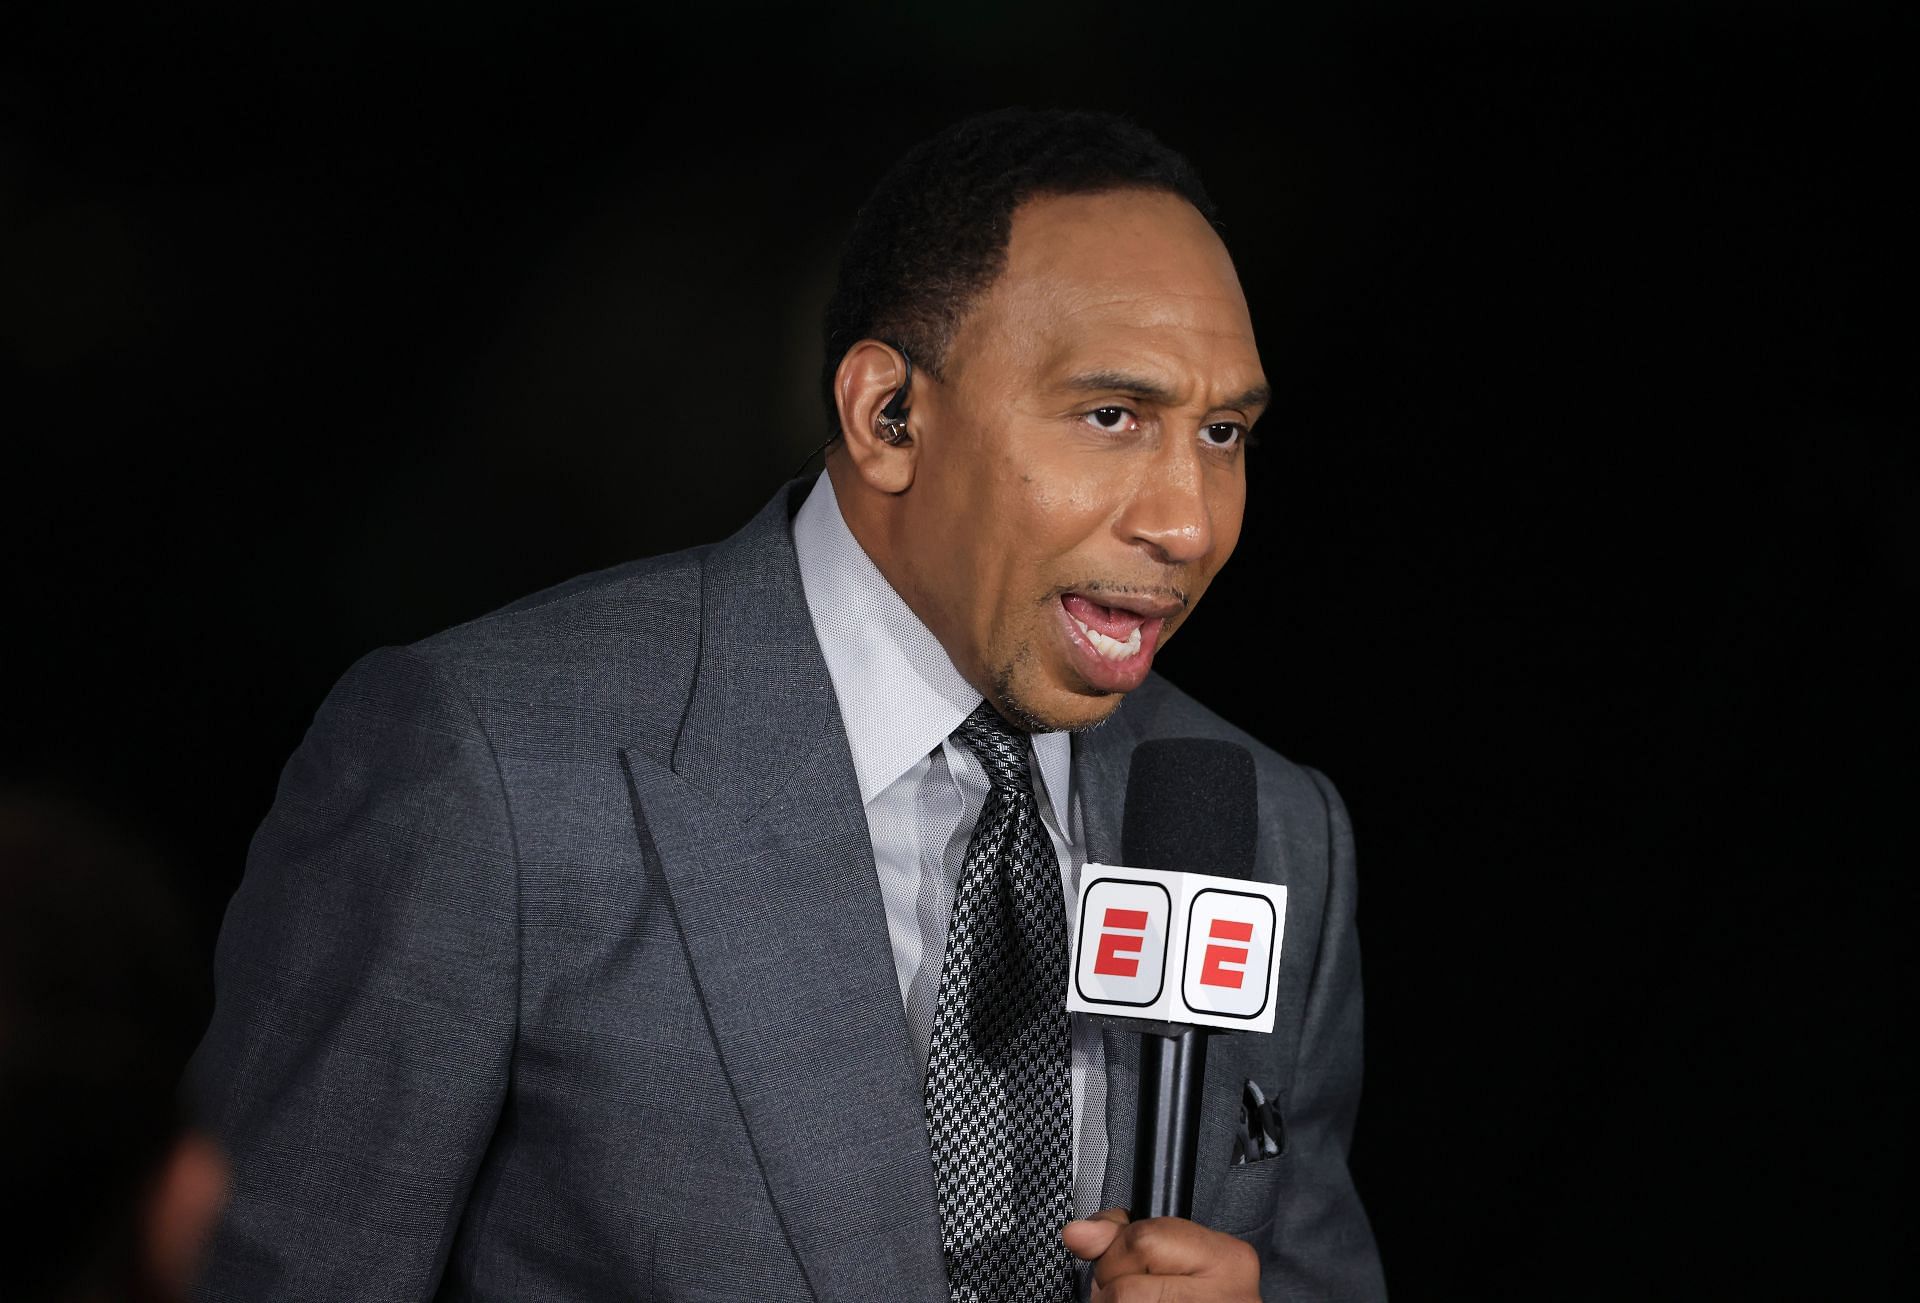 Stephen A. Smith during the 2021 NBA Finals.